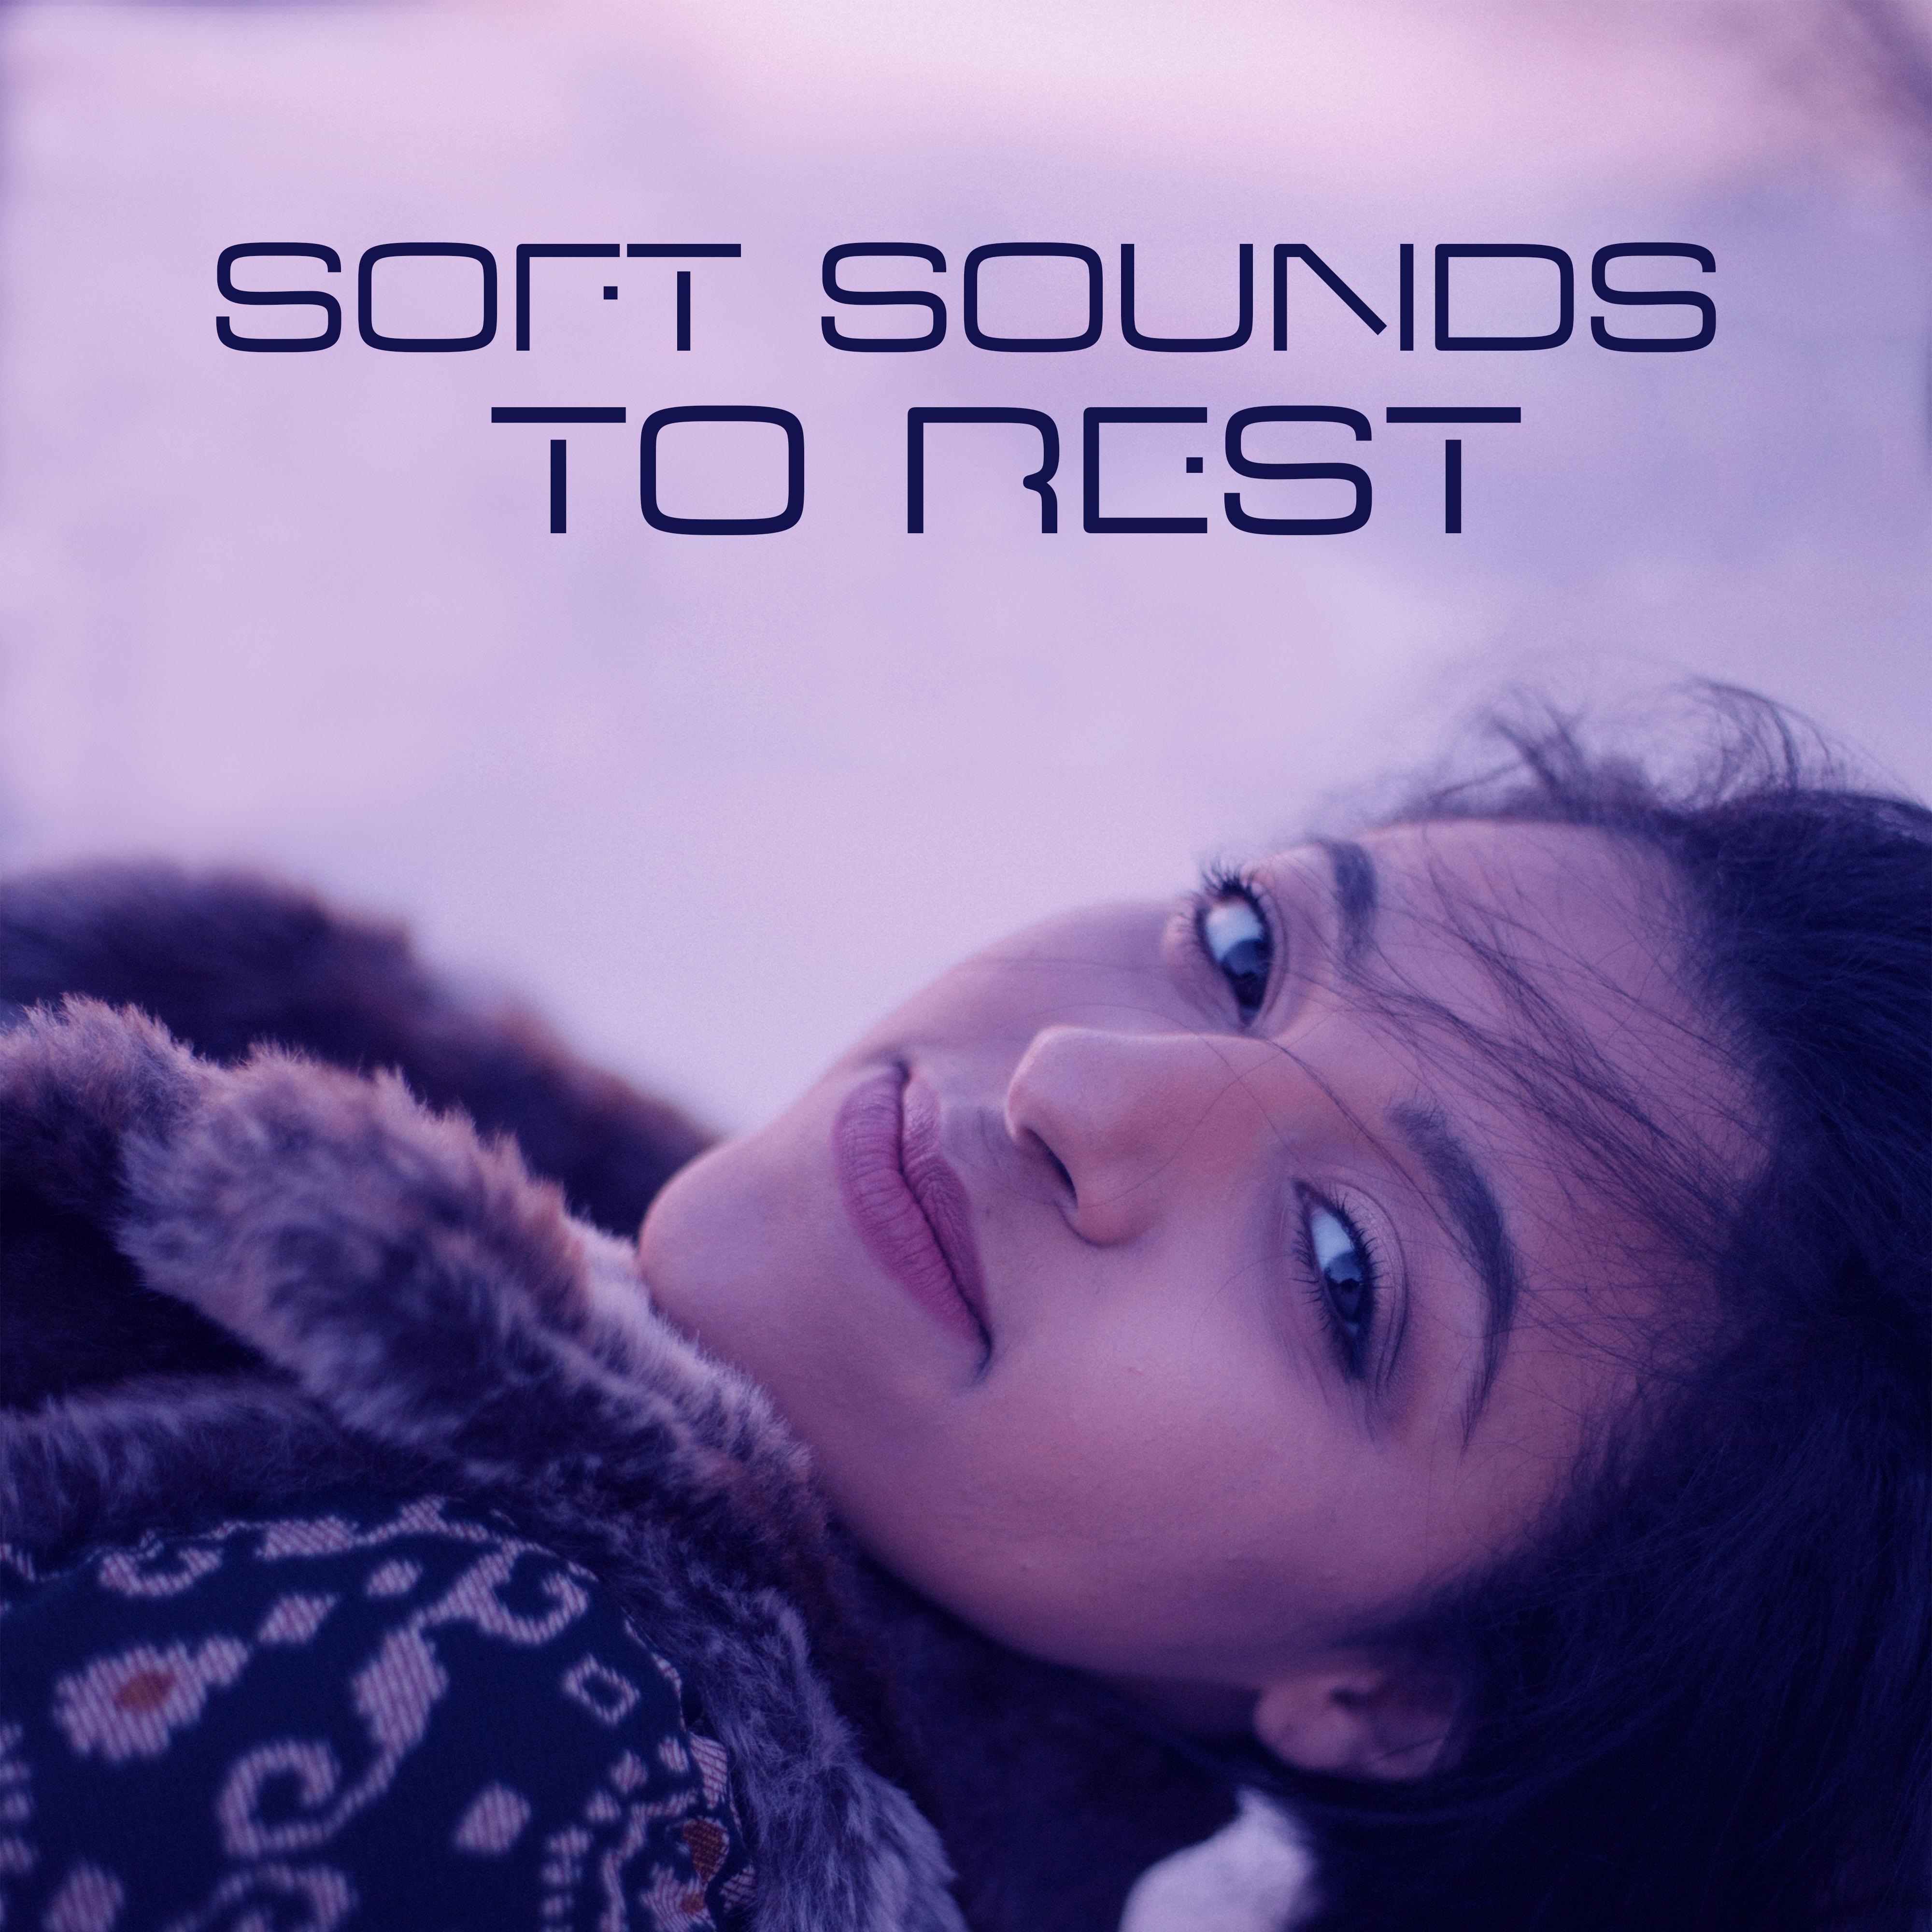 Soft Sounds to Rest  Calm Music to Relax, Peaceful Mind, Quiet Night Songs, Sleep Well, New Age Music